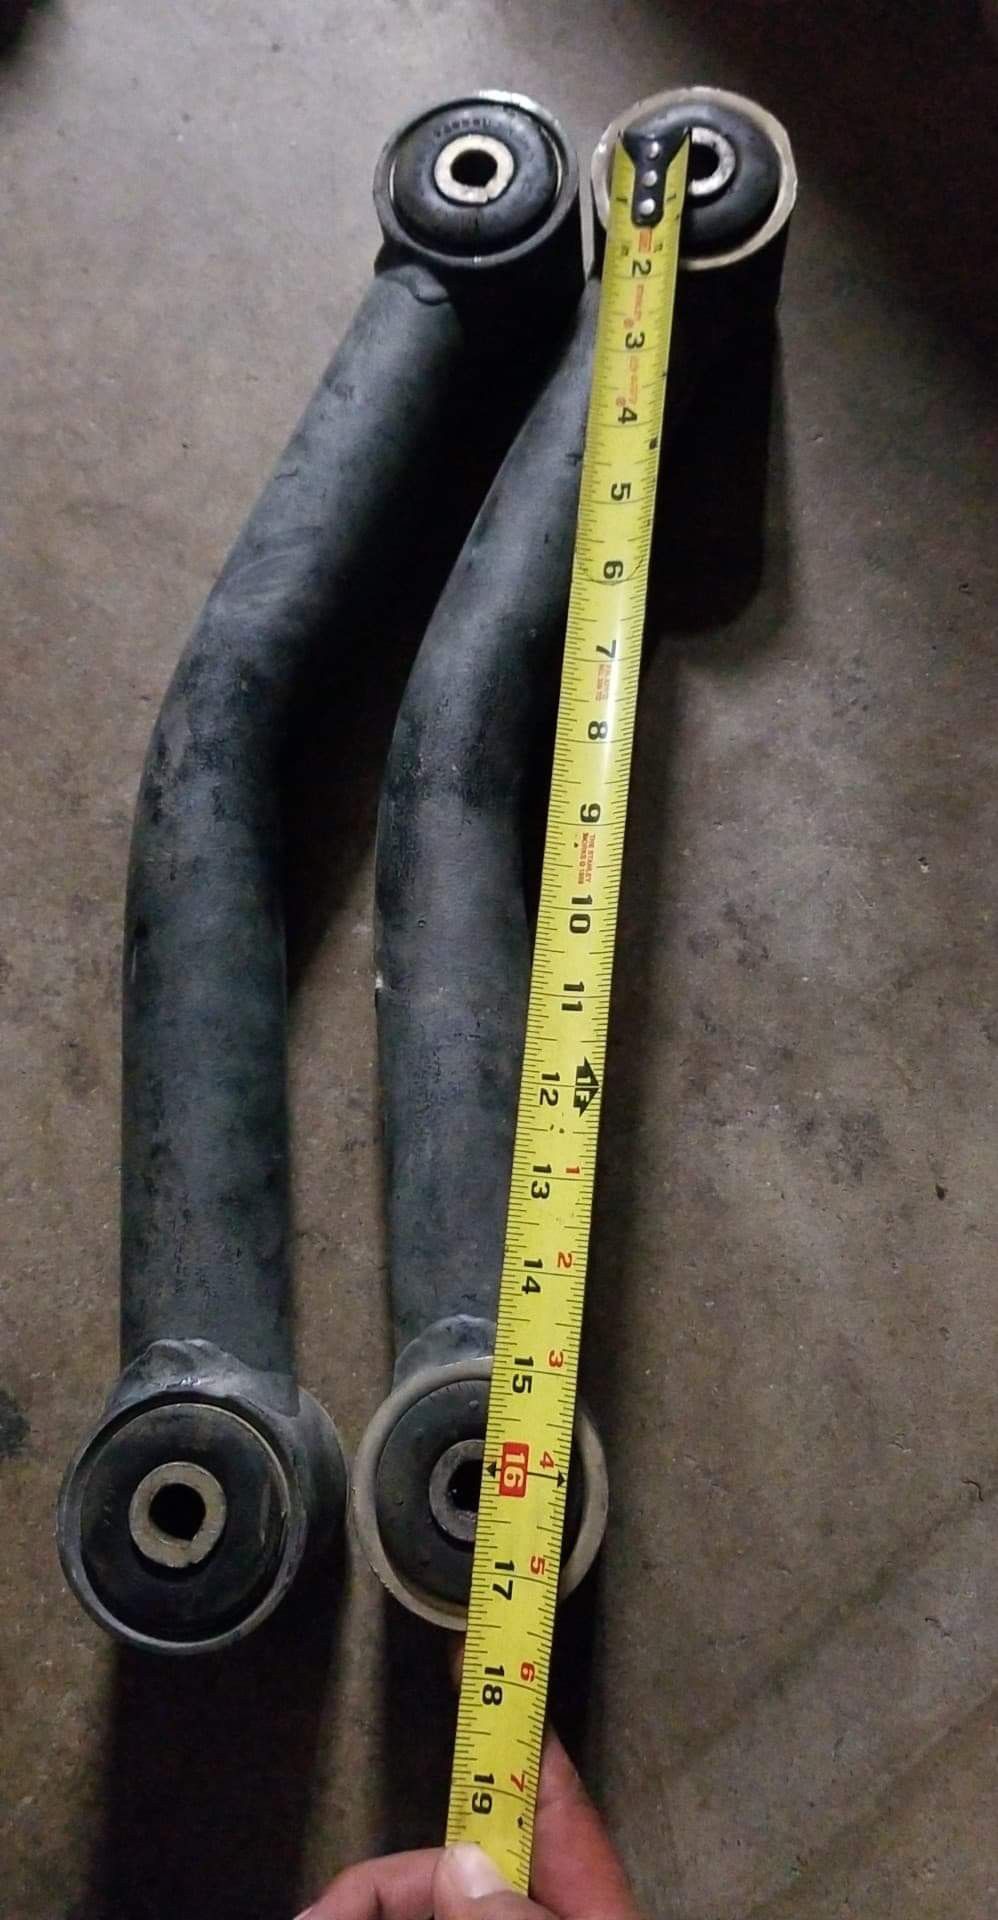 Jeep Lower control arms $60